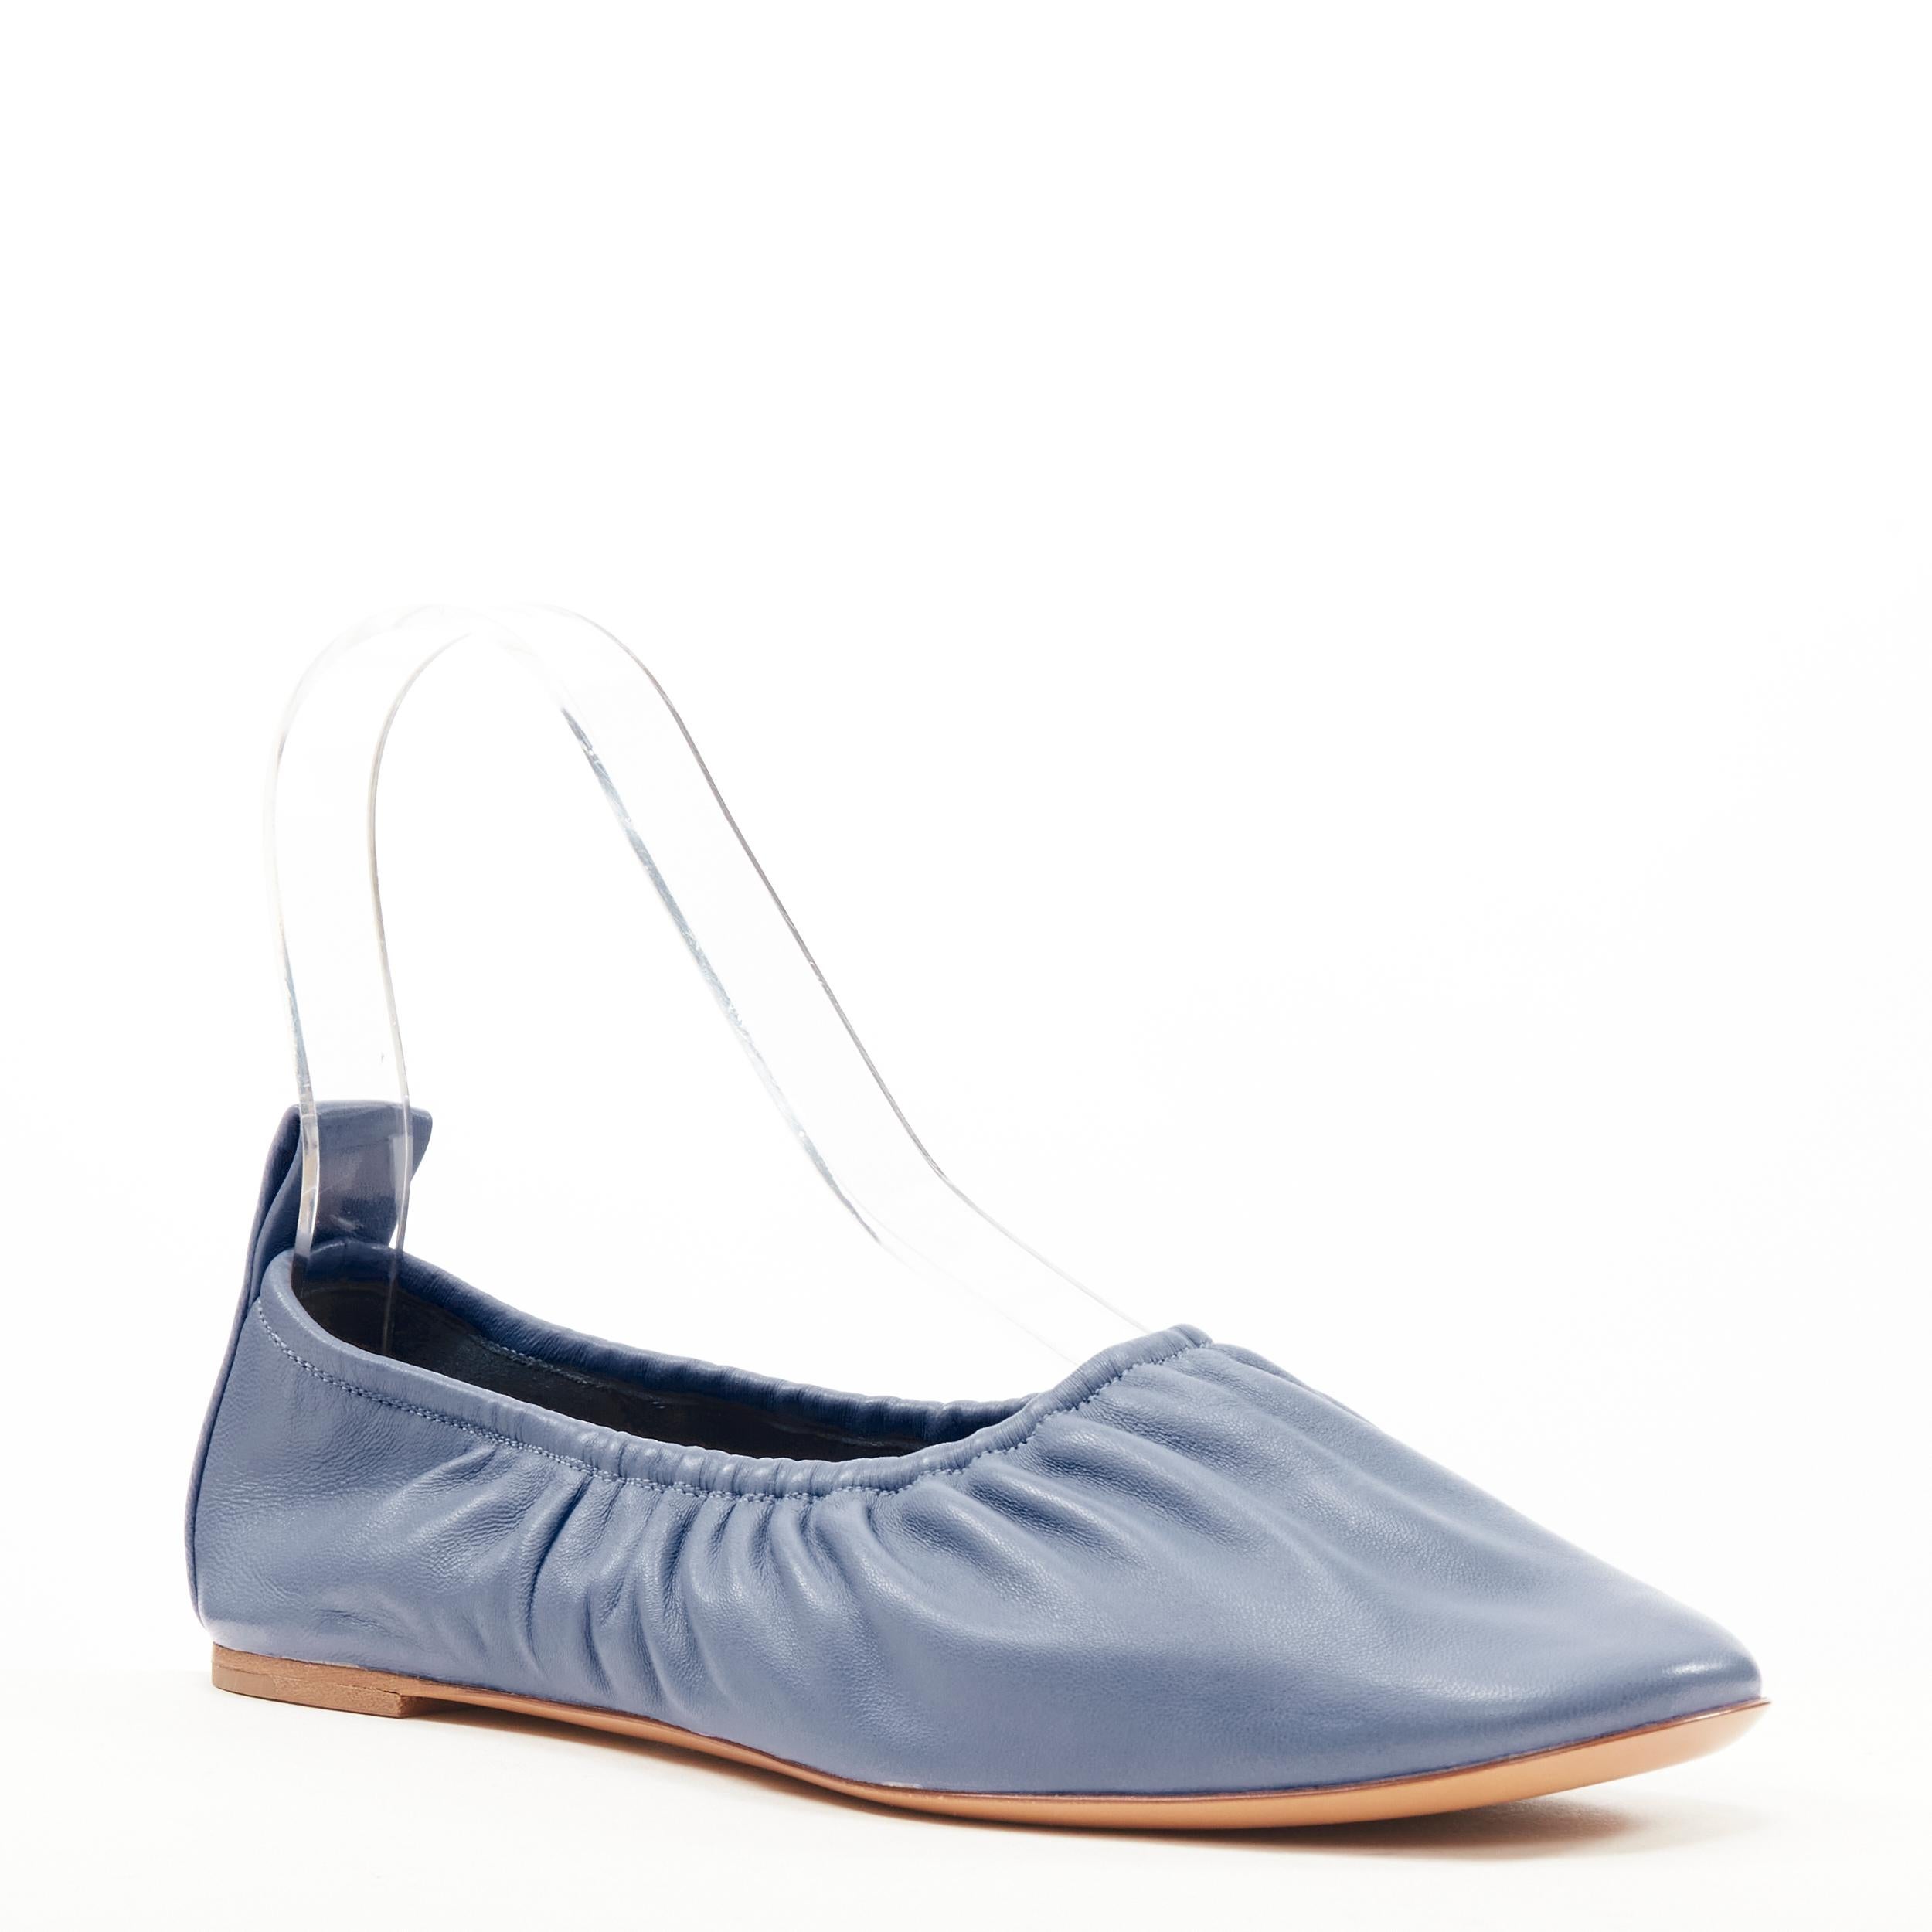 new OLD CELINE Phoebe Philo lilac purple soft leather ballerina flats EU36.5 
Reference: SNKO/A00187 
Brand: Celine 
Designer: Phoebe Philo 
Material: Leather 
Color: Purple 
Pattern: Solid 
Closure: Elasticated 
Extra Detail: Soft nappa leather.